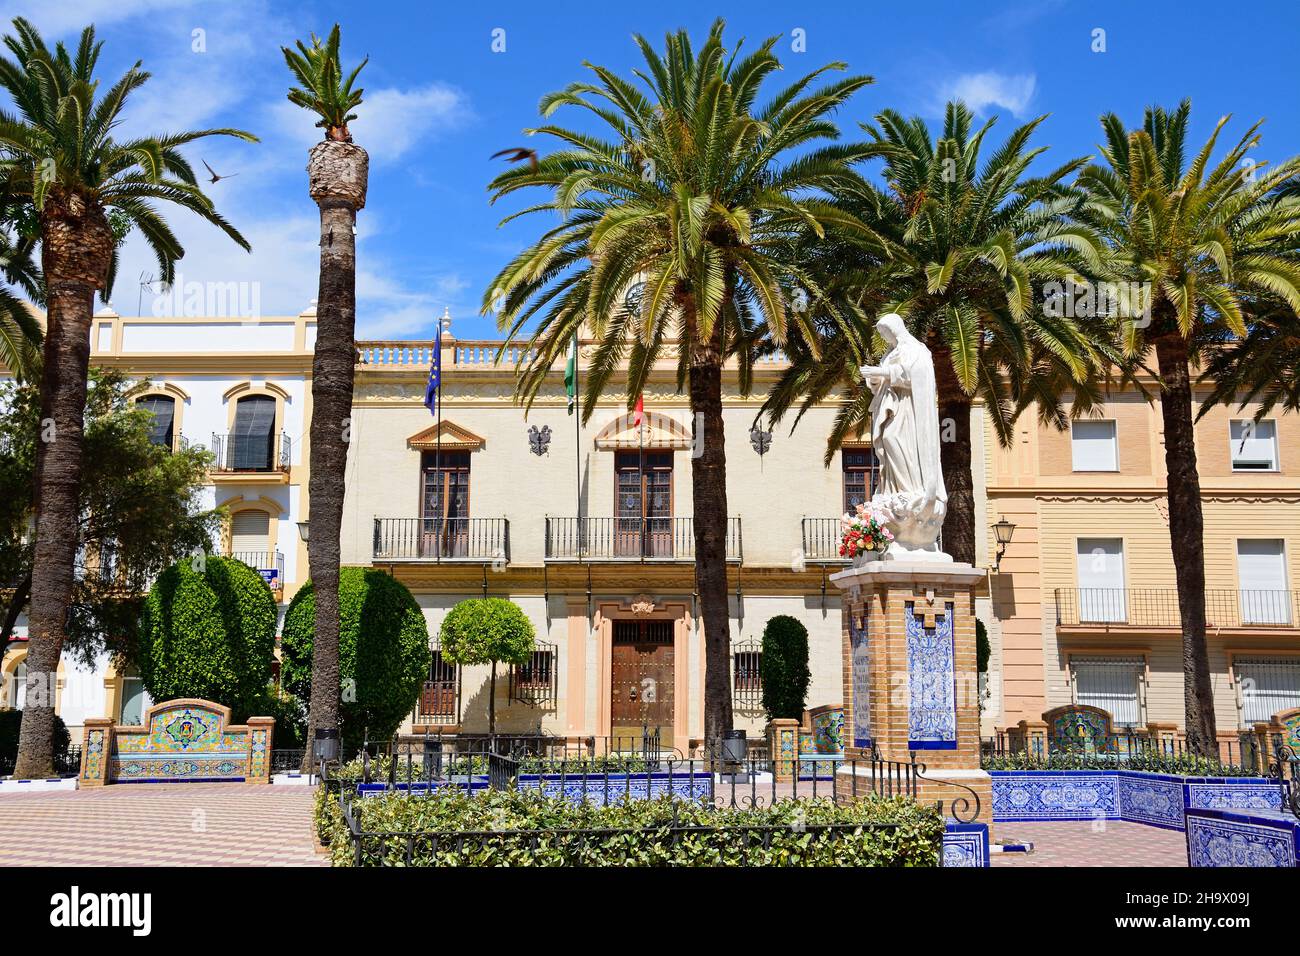 Statue in the Plaza de la Laguna with the town hall to the rear, Ayamonte, Huelva Province, Andalucia, Spain, Europe. Stock Photo